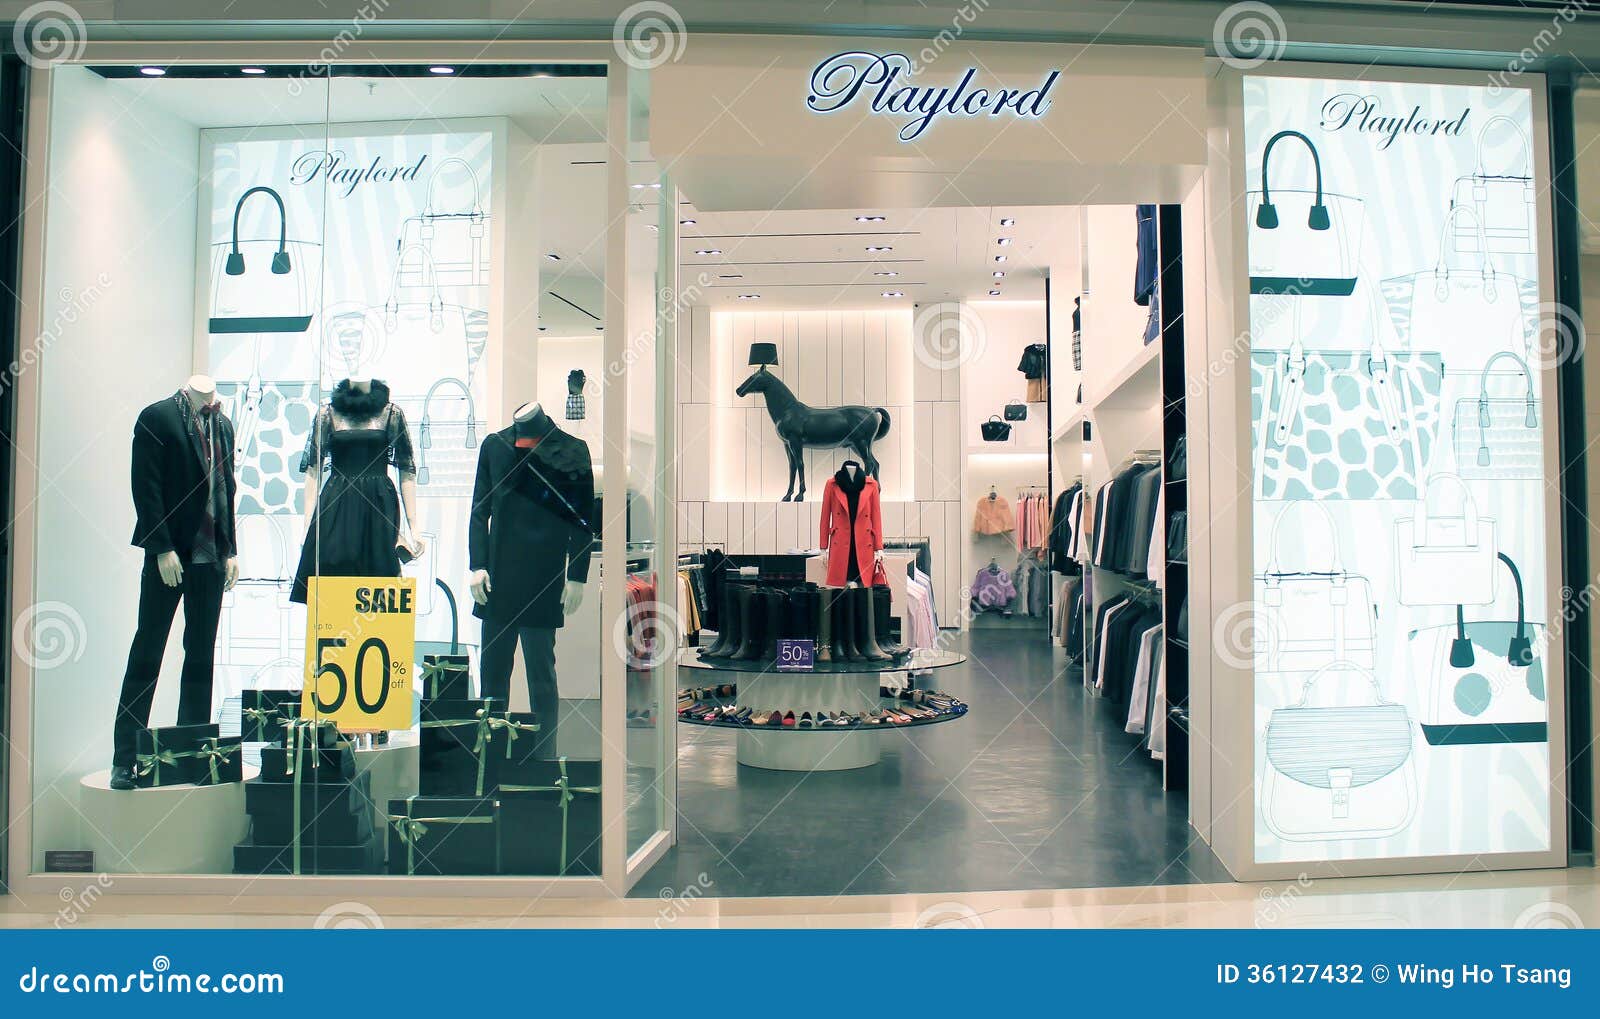 Playlord shop in hong kong editorial photography. Image of mall - 36127432